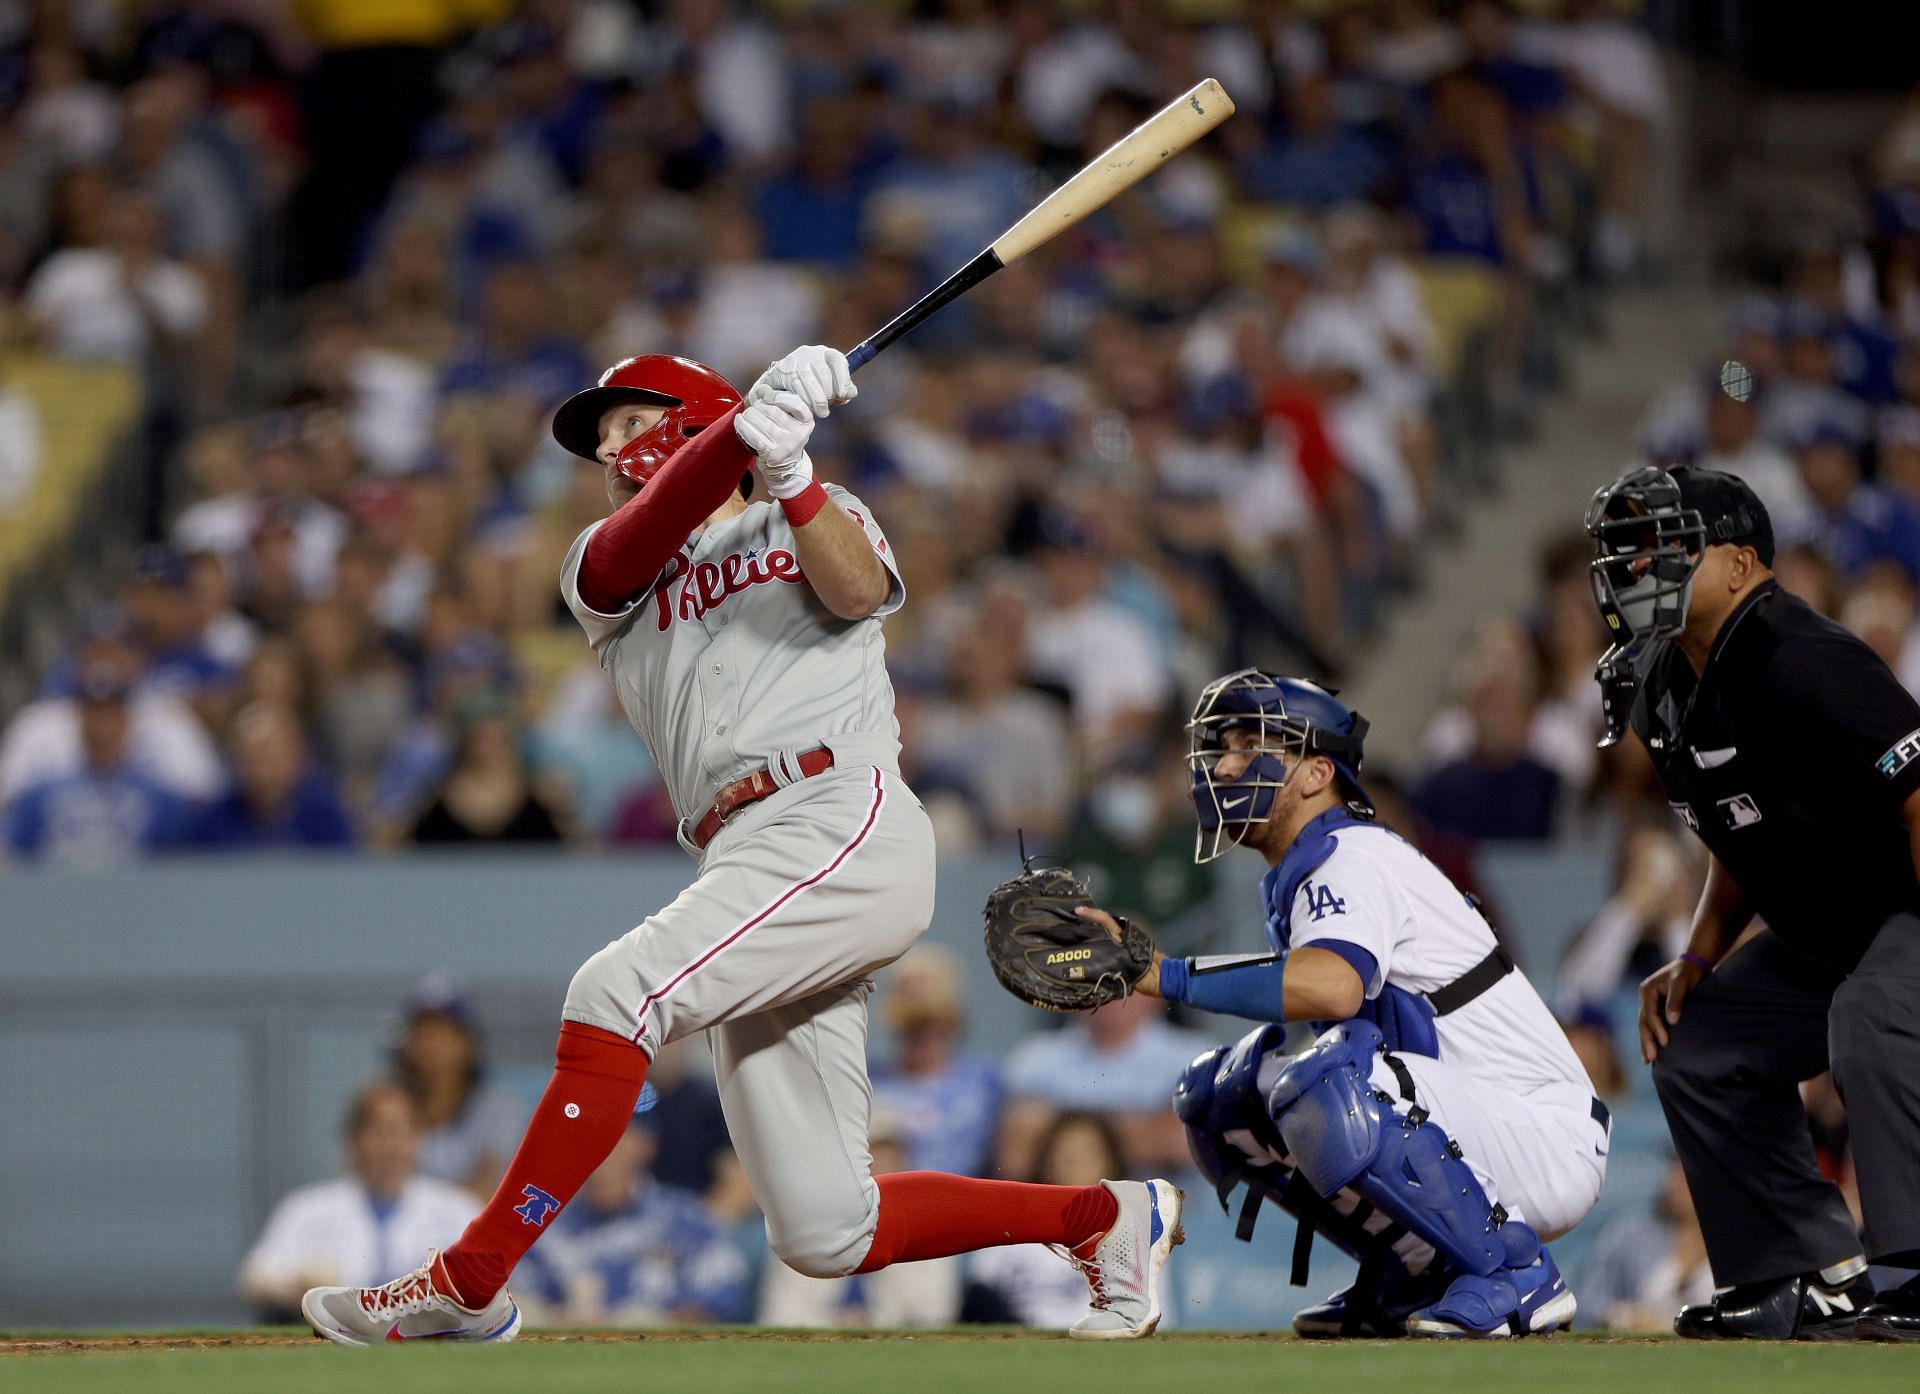 The Philadelphia Phillies face the Los Angeles Dodgers in a three-game set this weekend